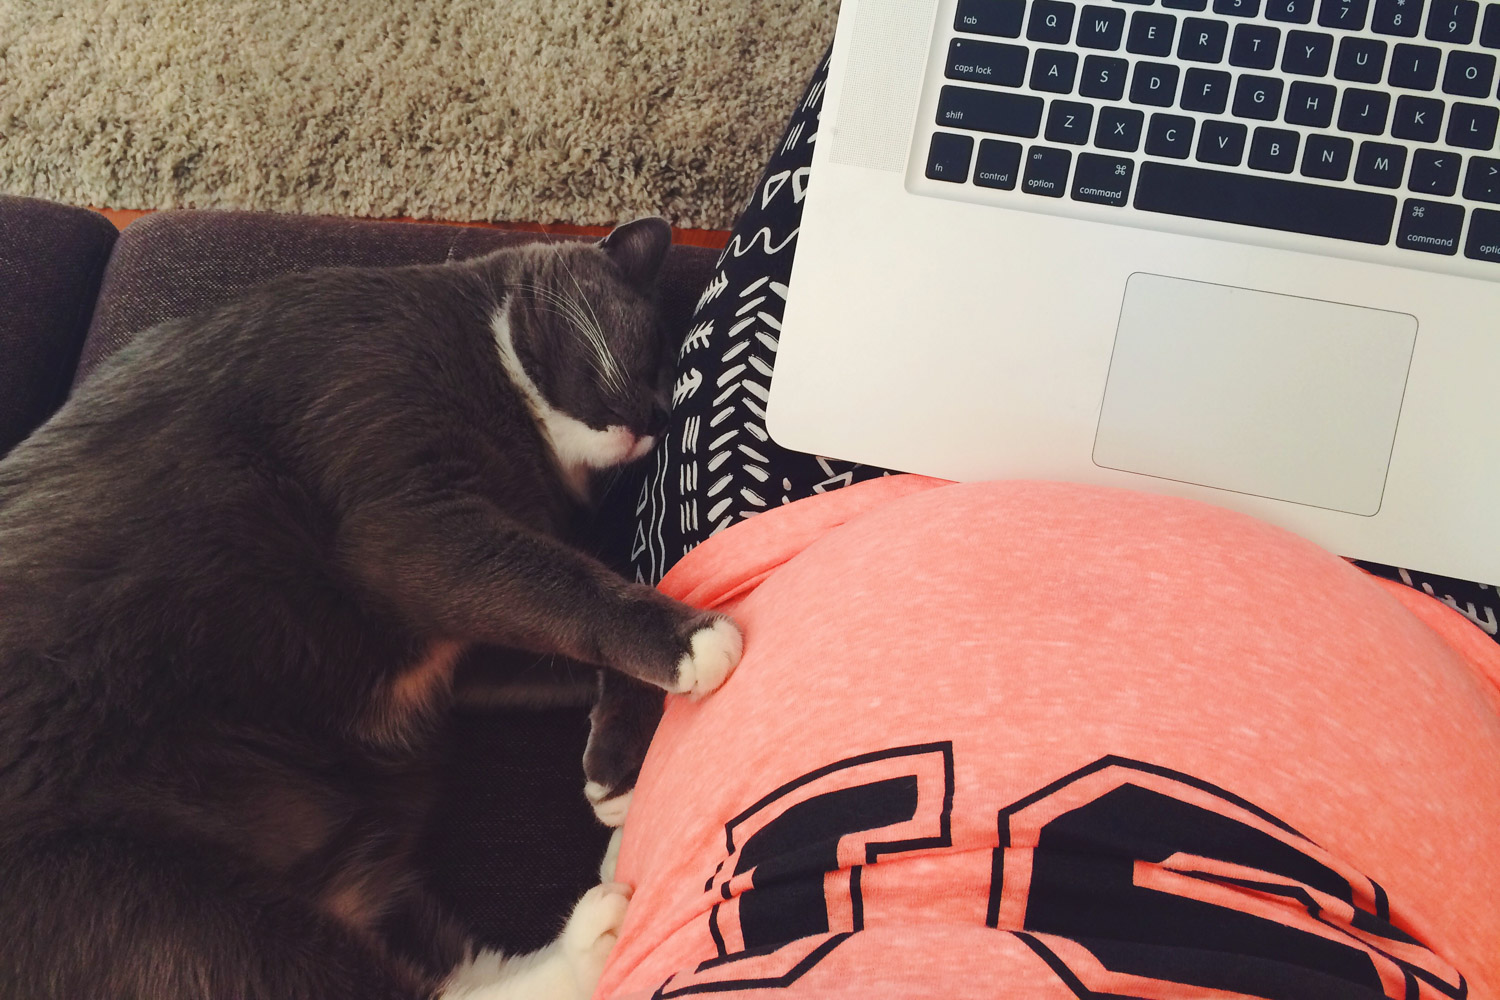 Pregnant mother working with laptop and cat curled up alongside.